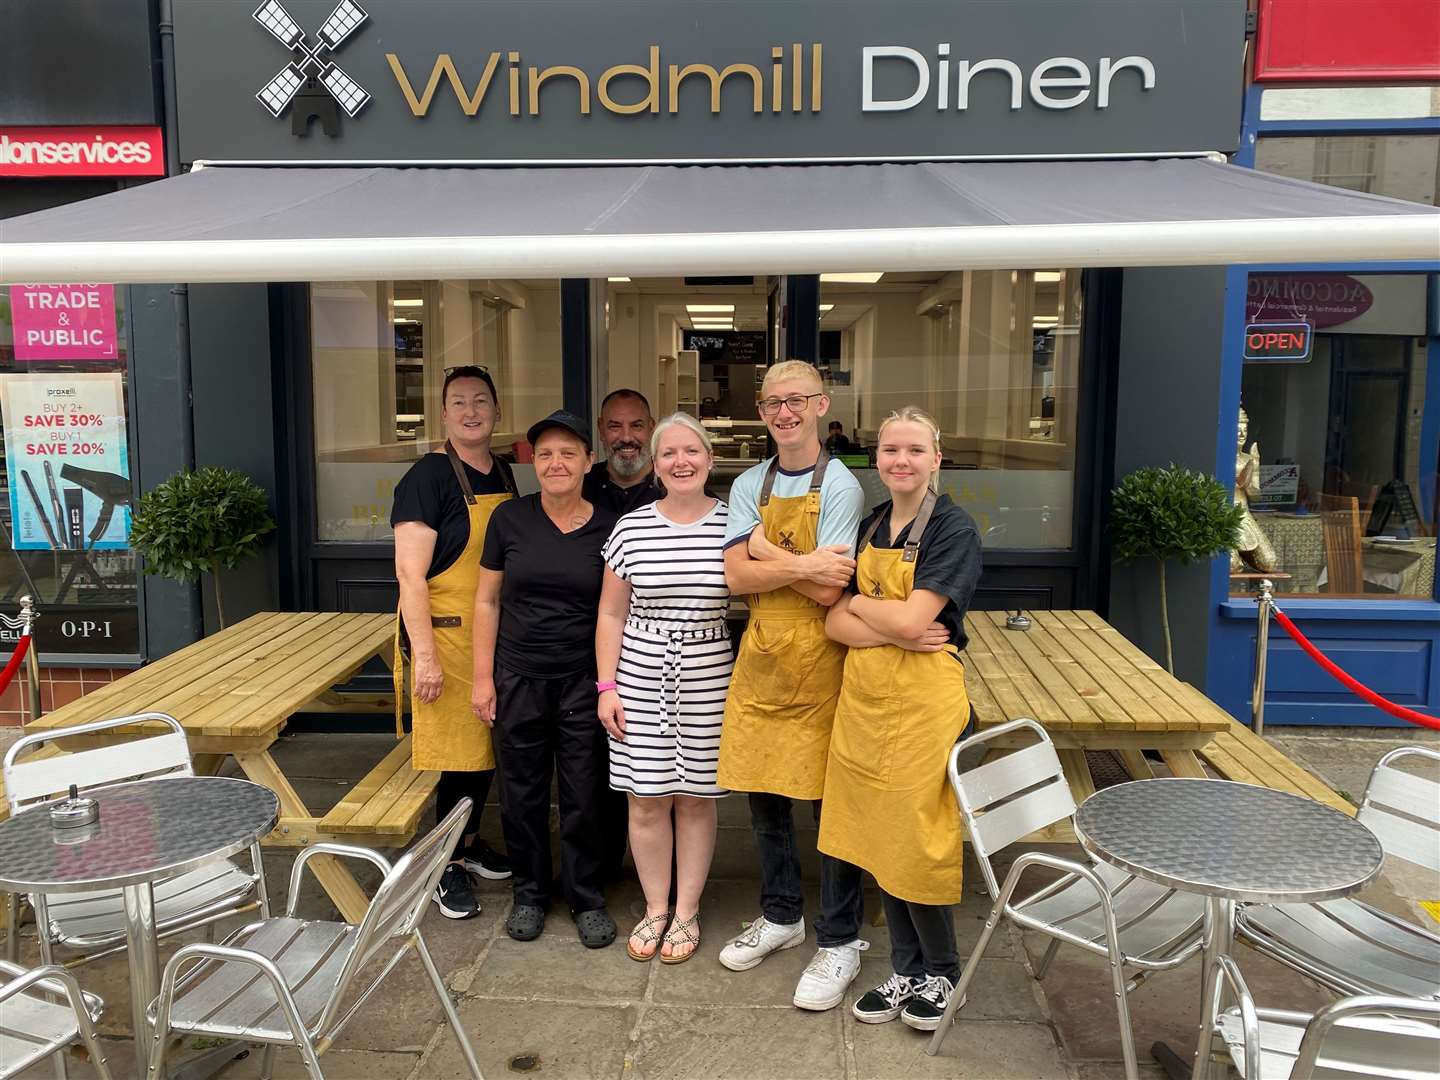 From left: Staff members Claire Jones, Sharon Harman, Pedro Da Concaiceo, with owner Lindsey West and staff members Sean Young and Viktorija Paskevica. Picture: Lindsey West